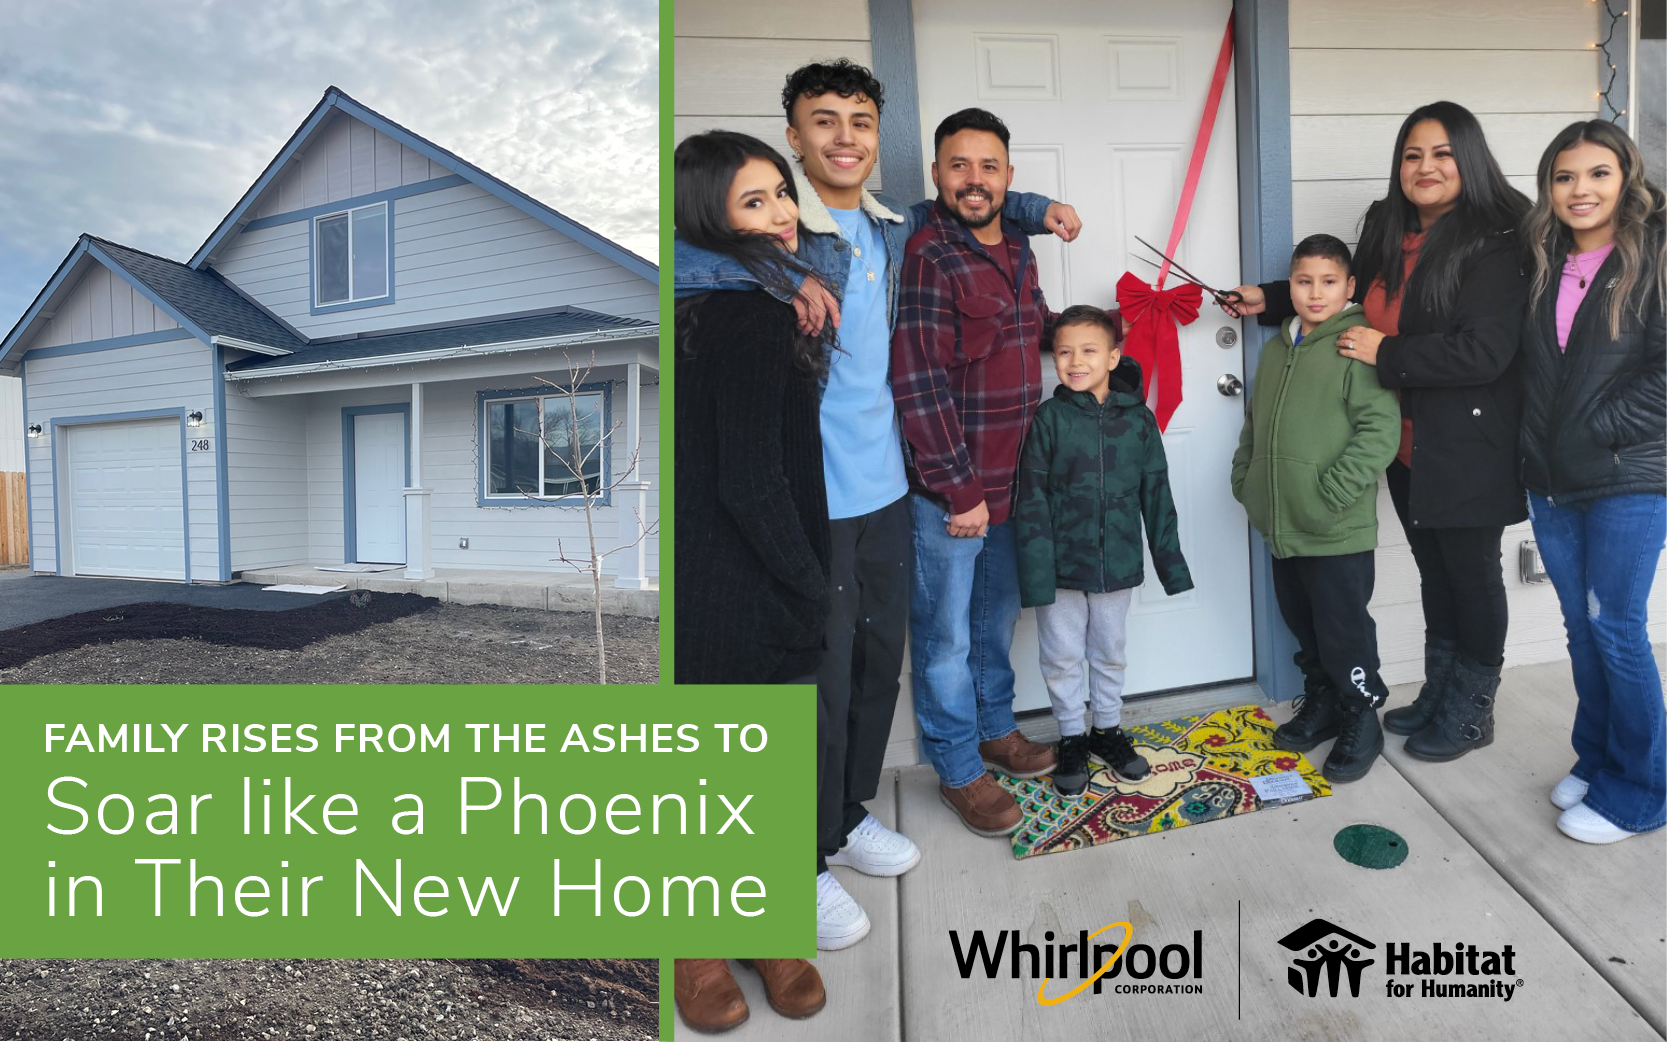 Image shows family next to their new home